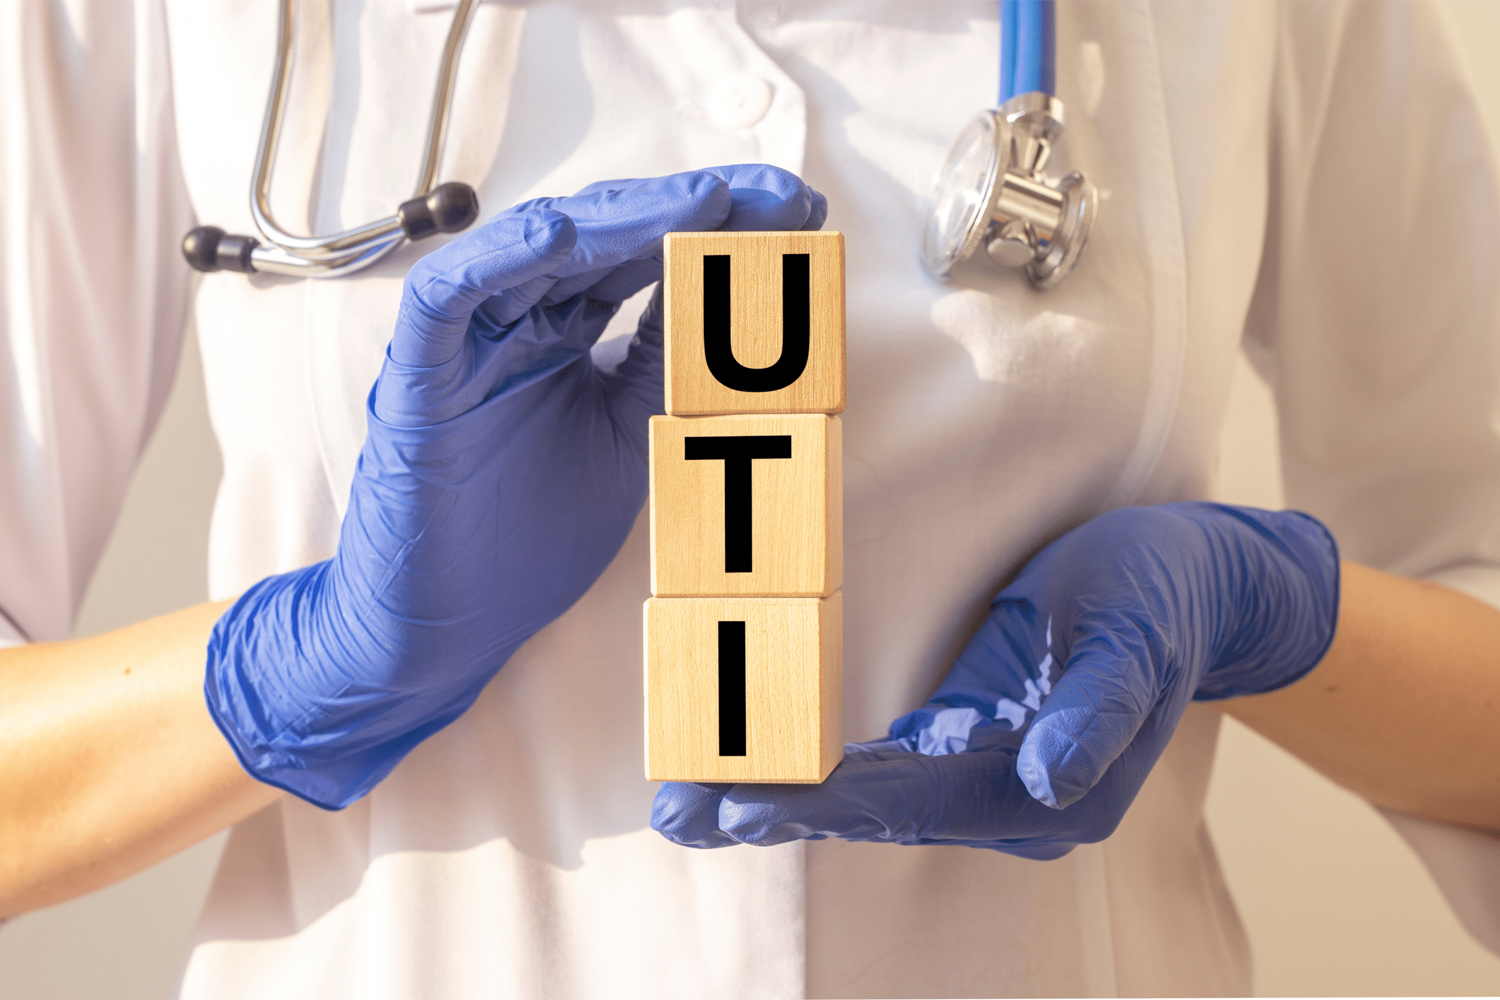 https://www.fortunenephro.com/wp-content/uploads/2018/02/how-do-you-know-if-a-uti-is-gone.jpg